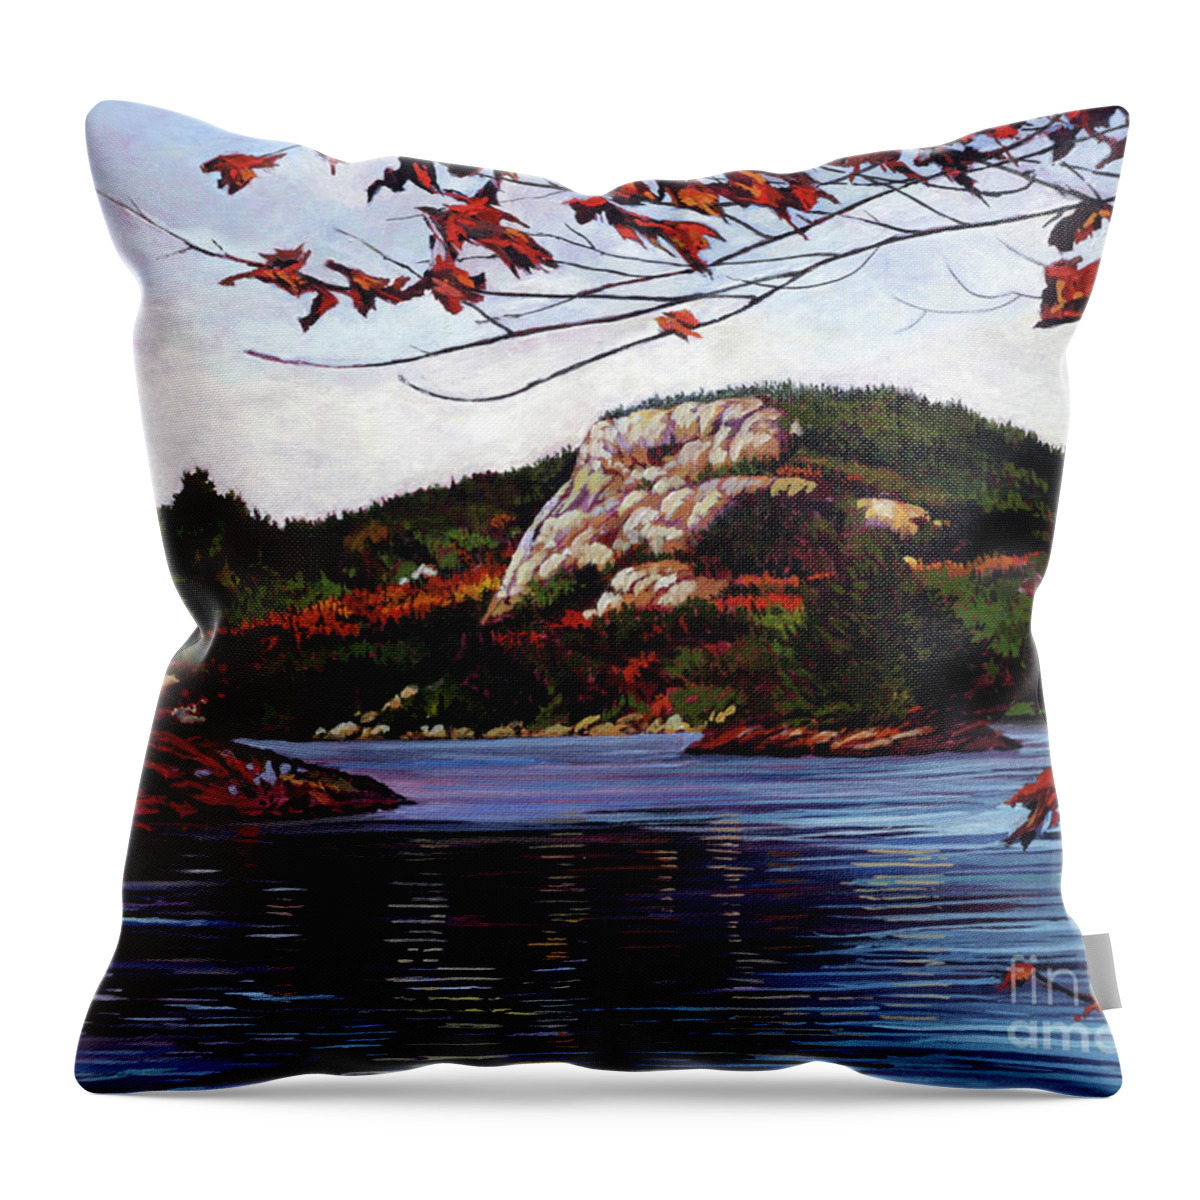 Oil Throw Pillow featuring the painting Magestic by William Band